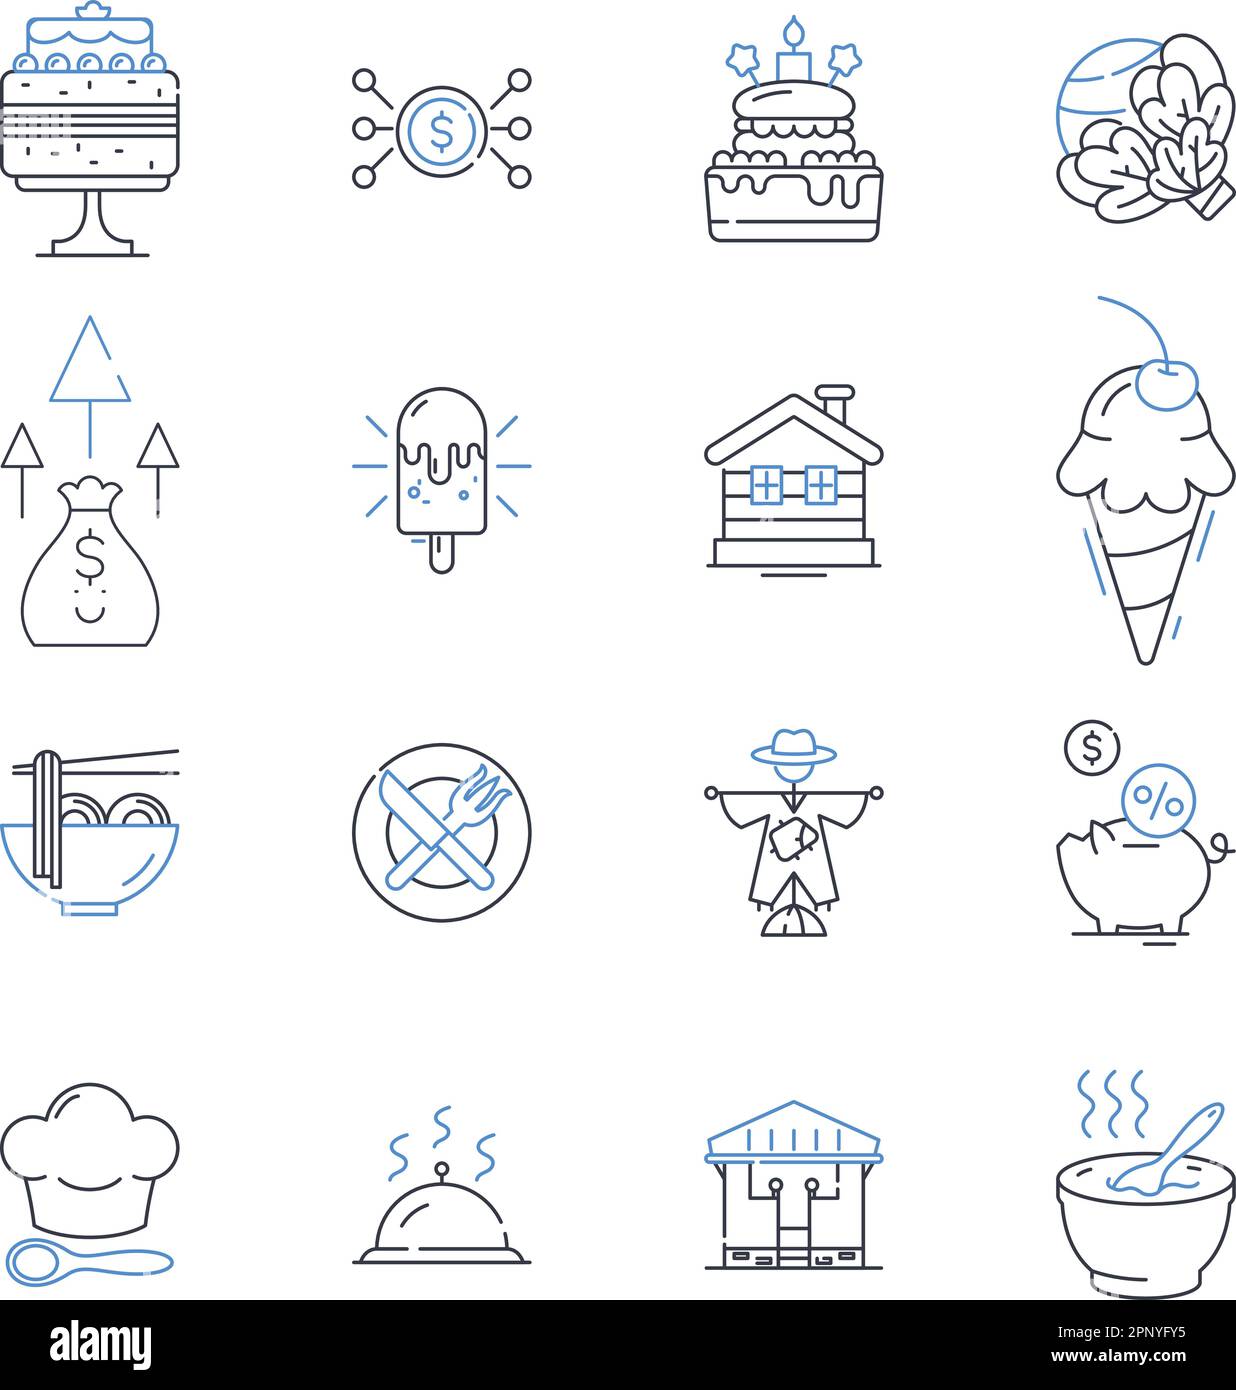 Cakery business line icons collection. Cake, Bakery, Cupcake, Sweet, Frosting, Confection, Dessert vector and linear illustration. Pastry,Bake,Icing Stock Vector